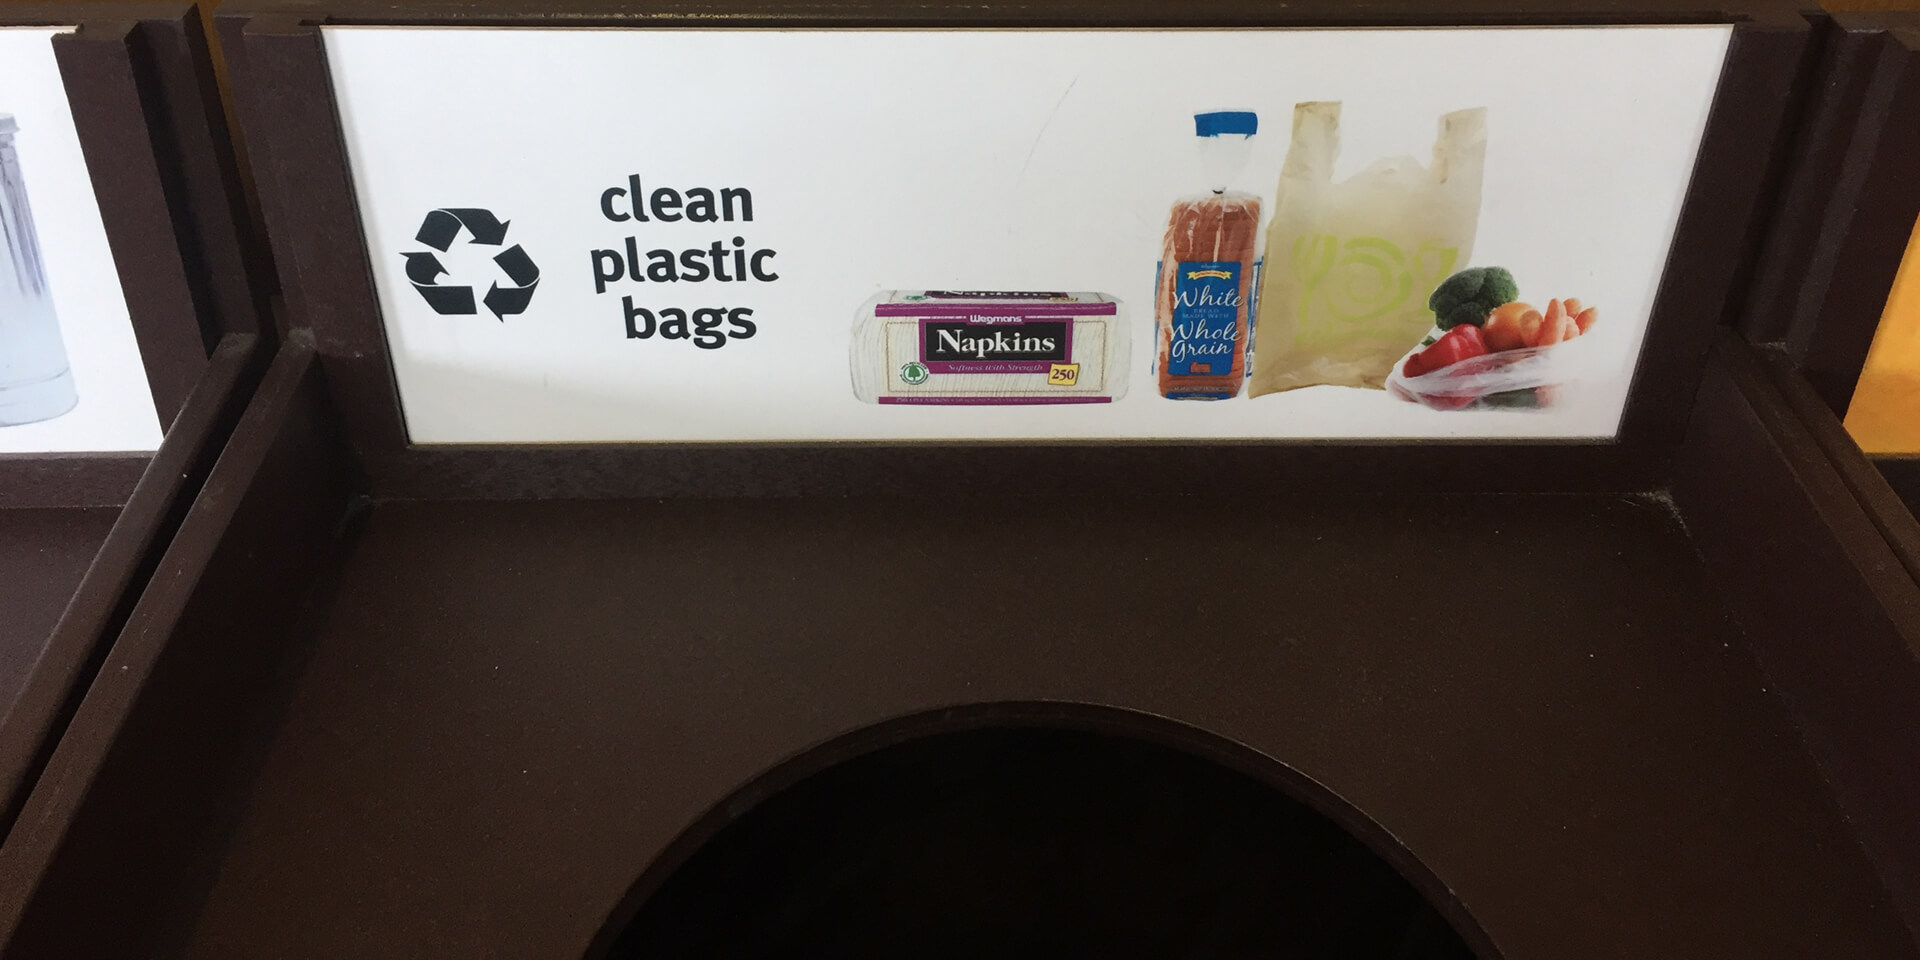 Plastic bag recycling bin at a grocery store